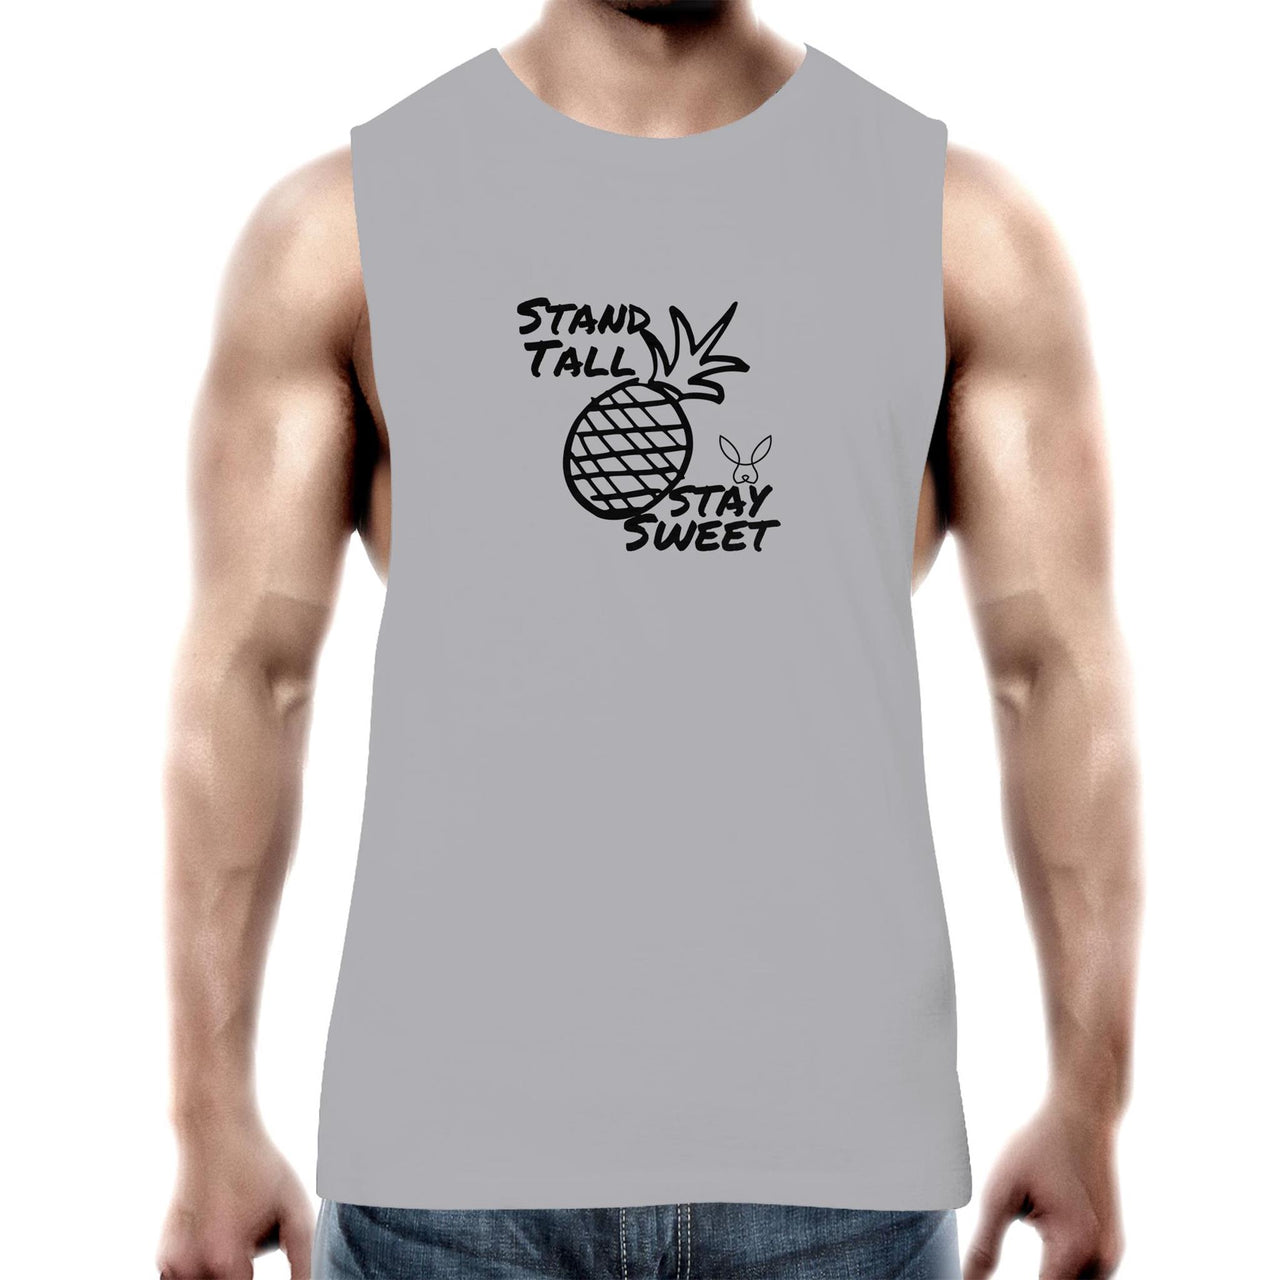 Stand Tall Tank Top Tee by CBF Clothing in Grey